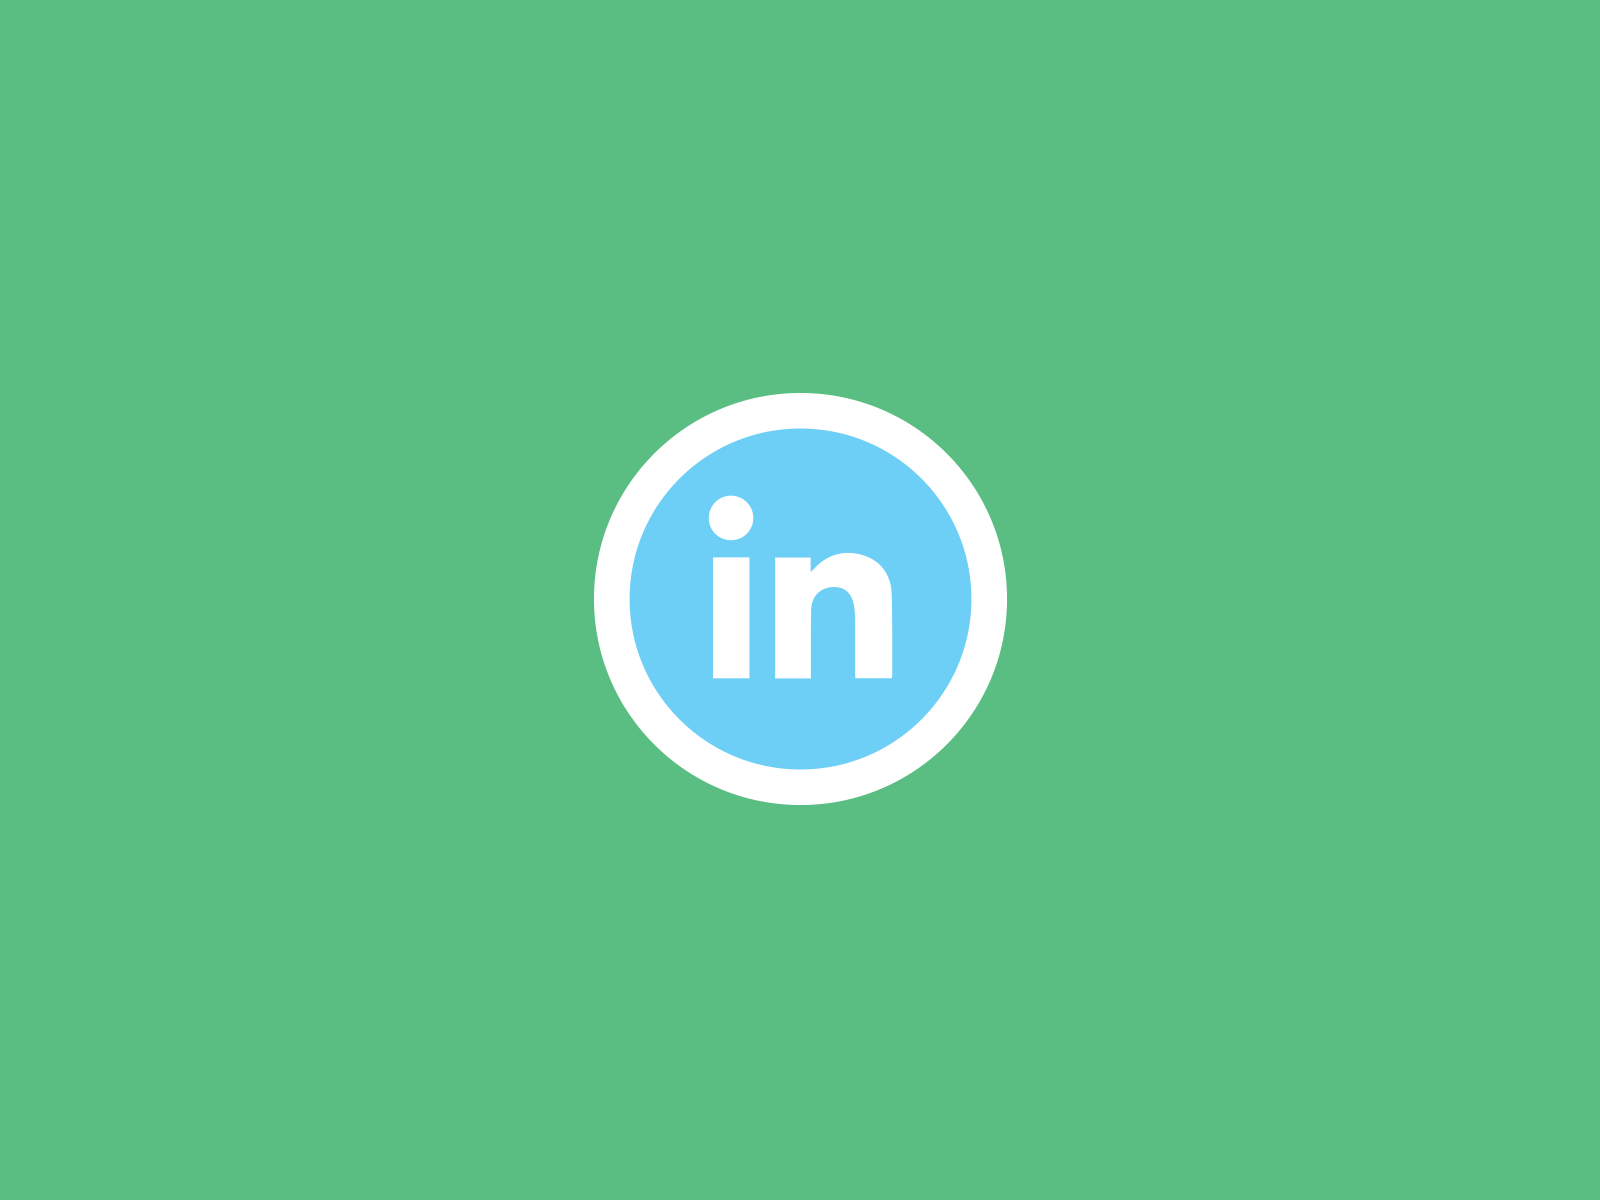 Connect with BrandCreativity on LinkedIn